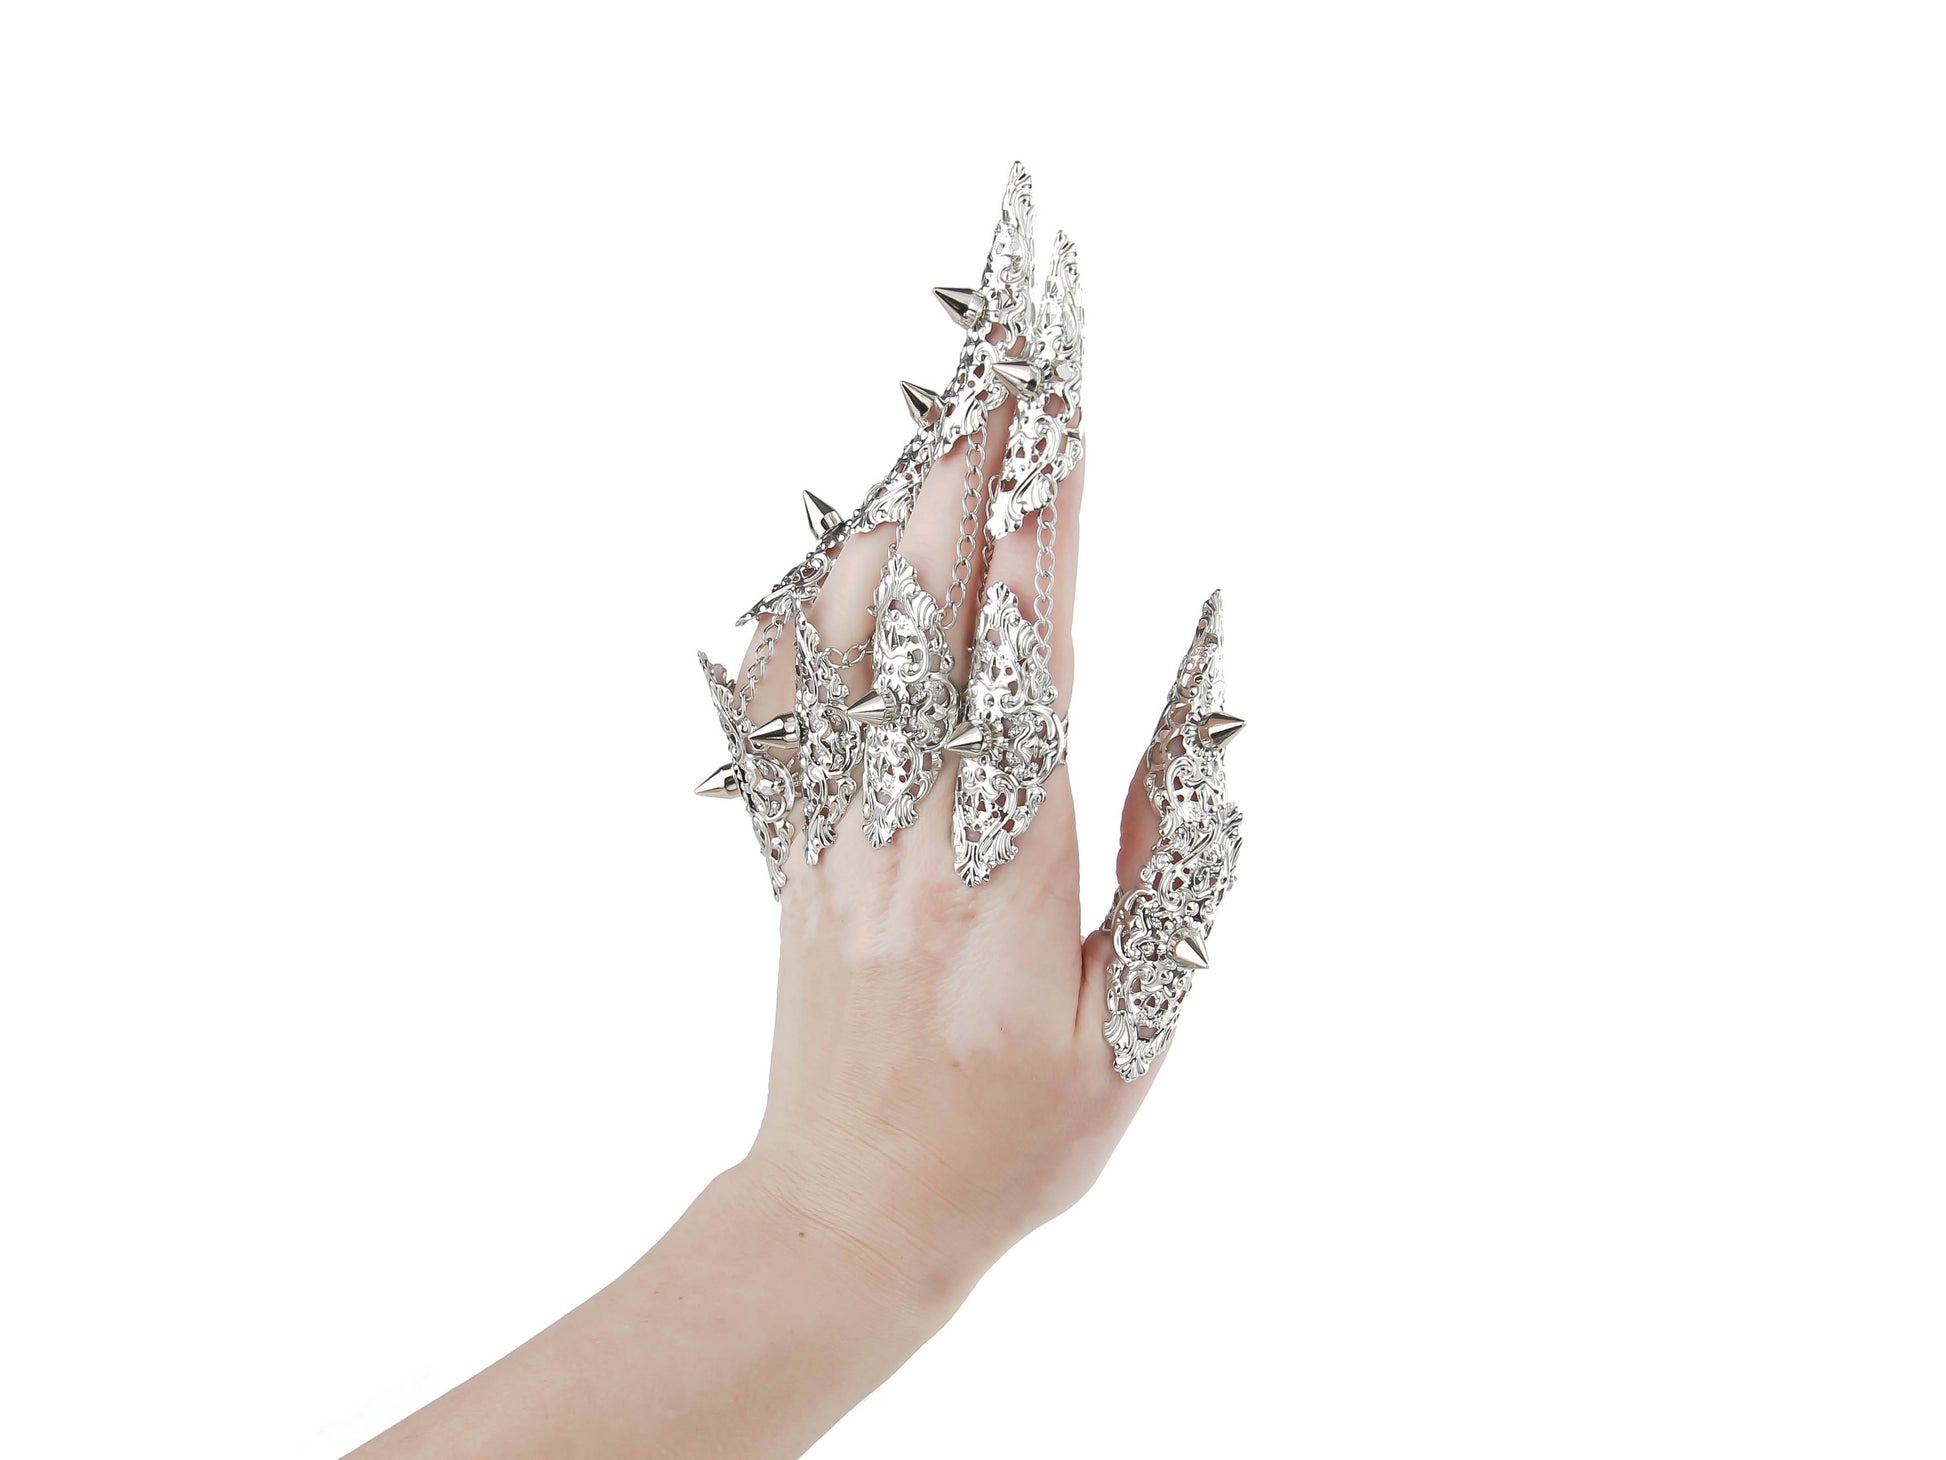  A hand is fully adorned with Myril Jewels' studded nail claw rings, each featuring a detailed silver design with sharp, edgy protrusions. These rings showcase a bold neo-goth aesthetic, perfect for dark-avantgarde fashion enthusiasts. The set is an ideal choice for creating a dramatic look at Halloween events, embodying the gothic-chic and whimsigoth spirit, and is also suited for witchcore, everyday wear, or as statement jewelry for rave parties and festivals.